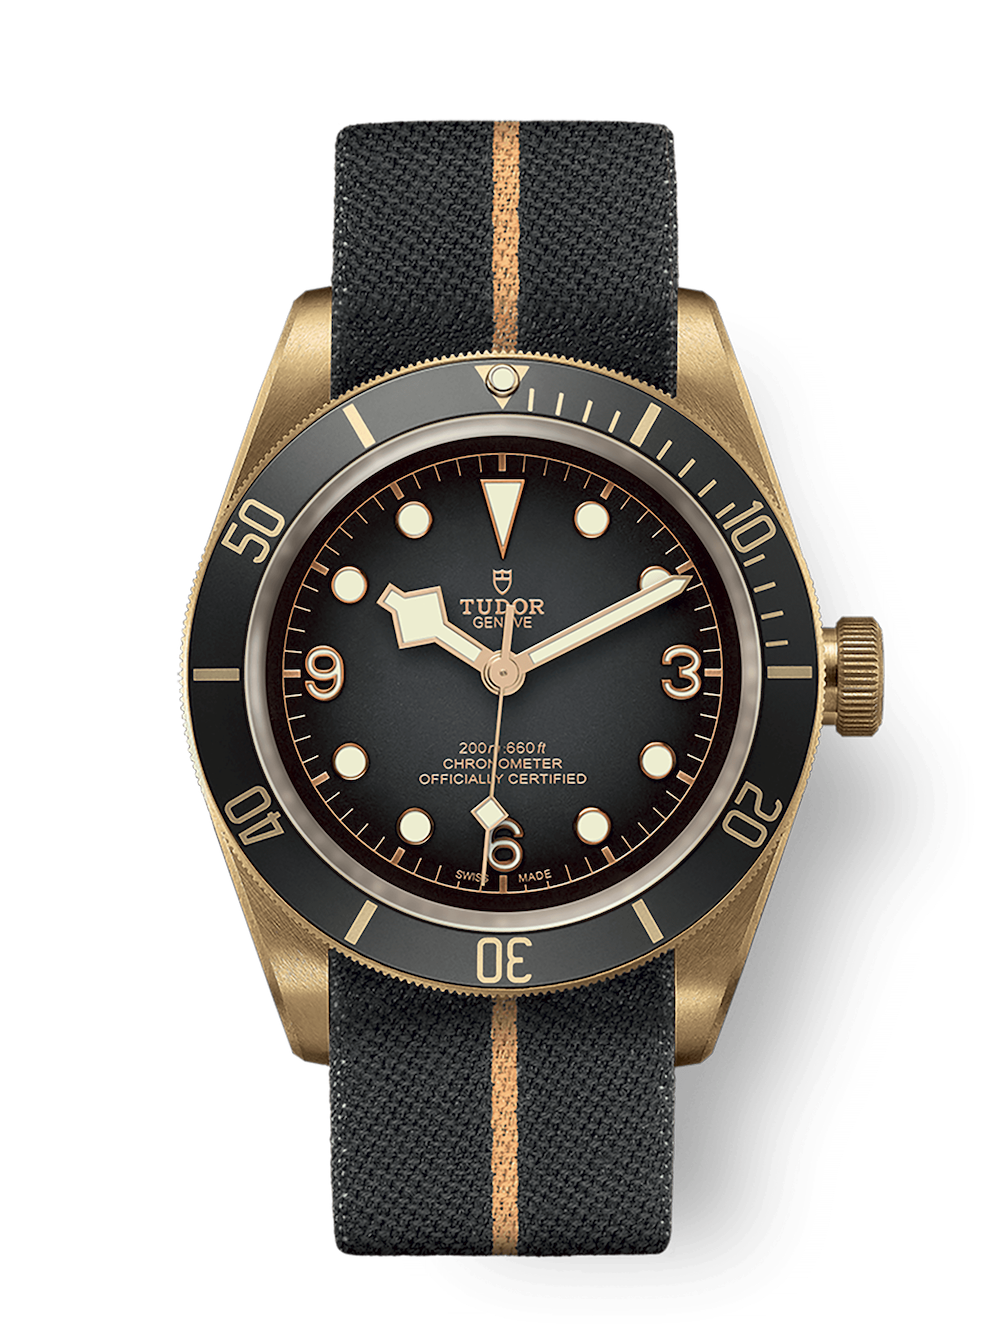 The Complete Buying Guide To Tudor Watches | lupon.gov.ph